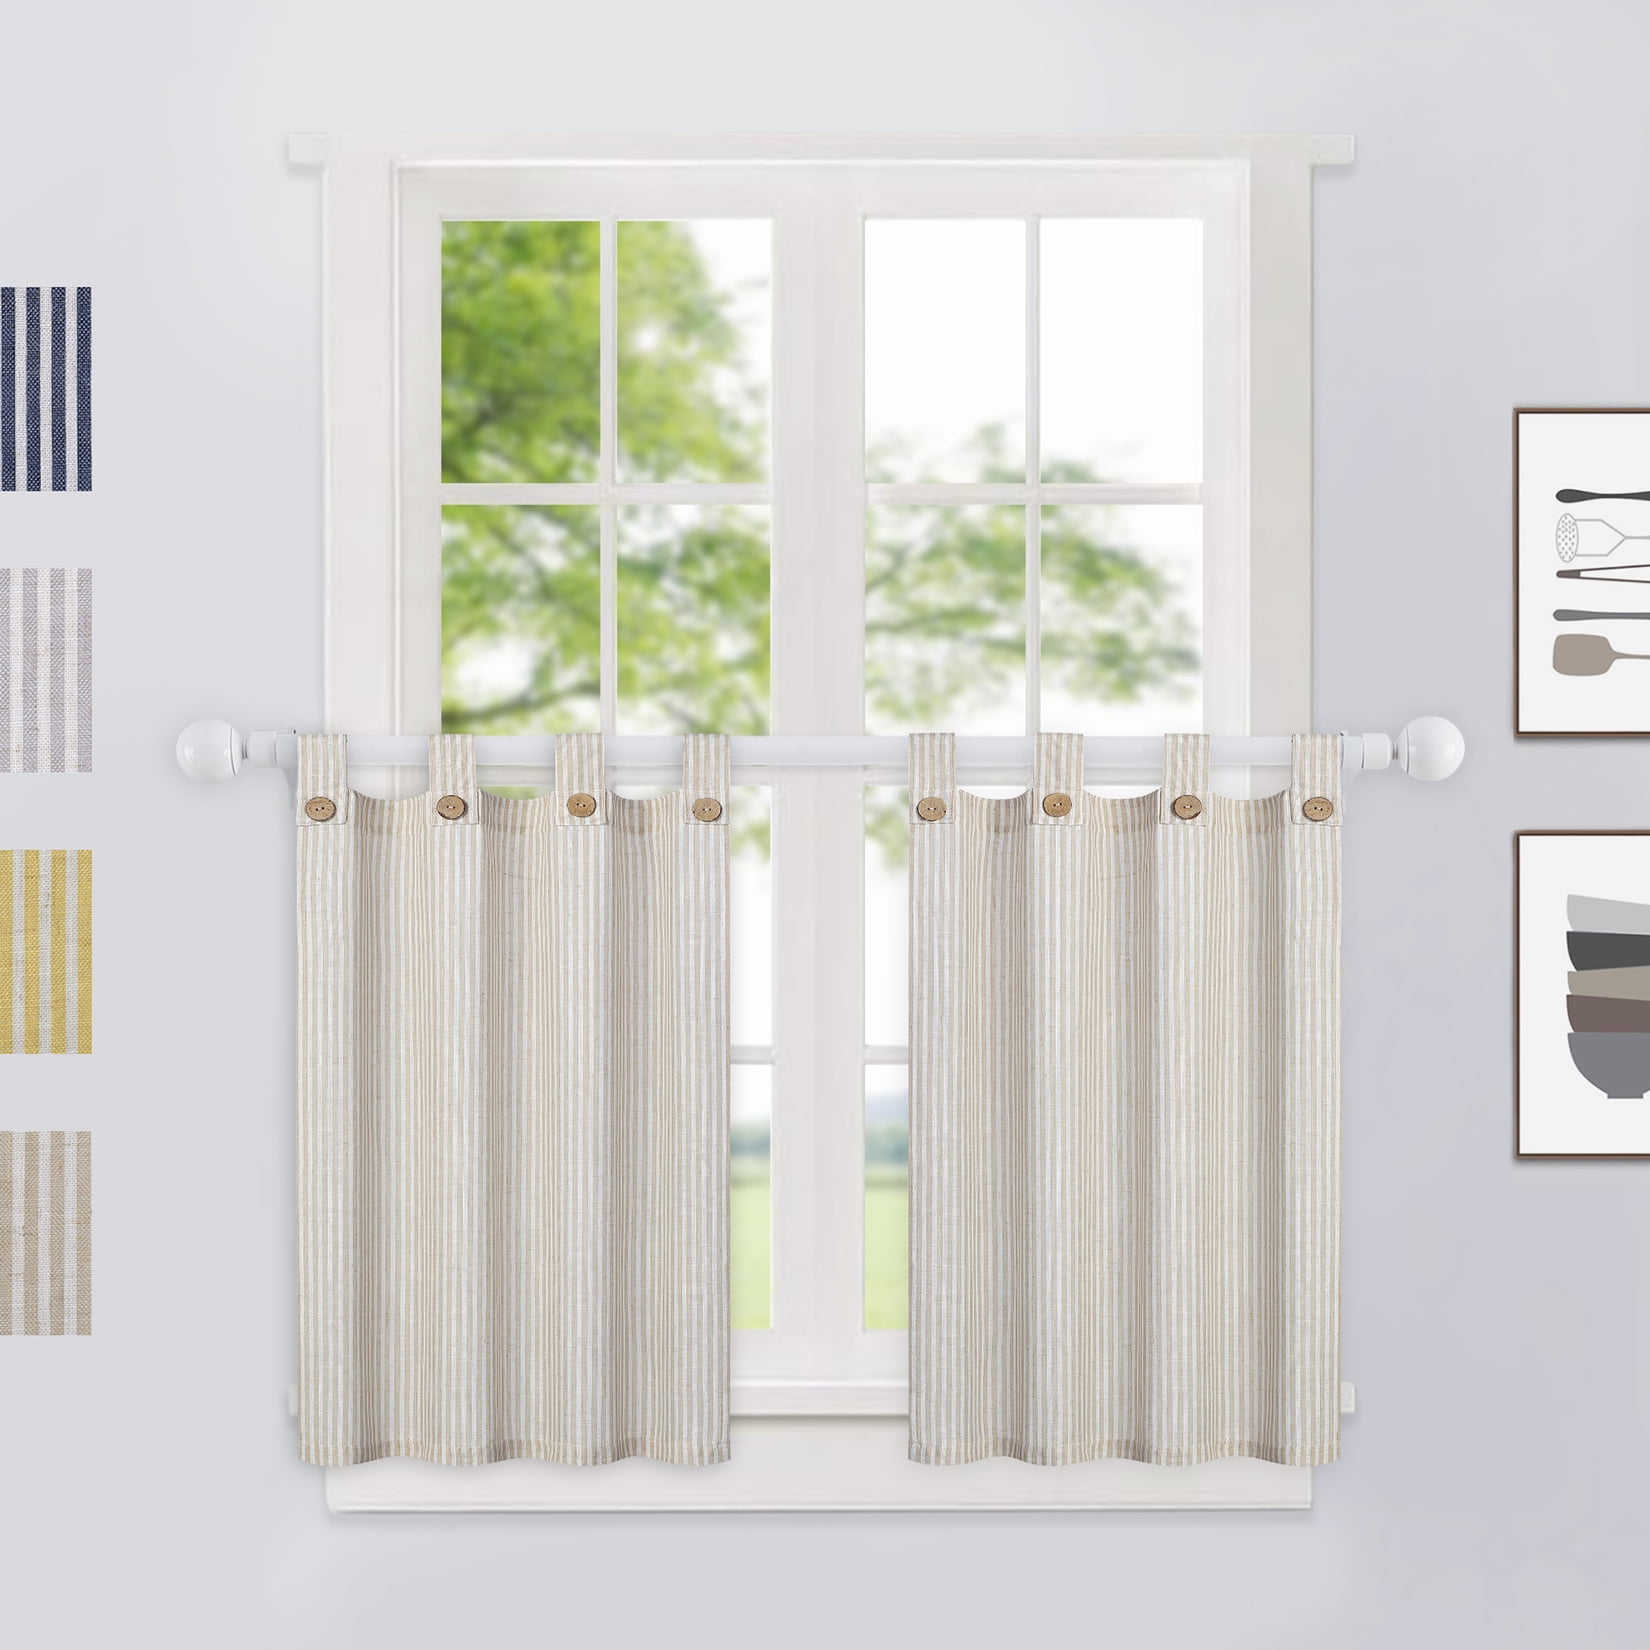 2 Panels CAROMIO Kitchen Curtains Decorative Striped Semi Transparent Half Window Curtain Voile Sheer Cafe Curtains,Small Curtains for Living Room,Nature,27 x 24 